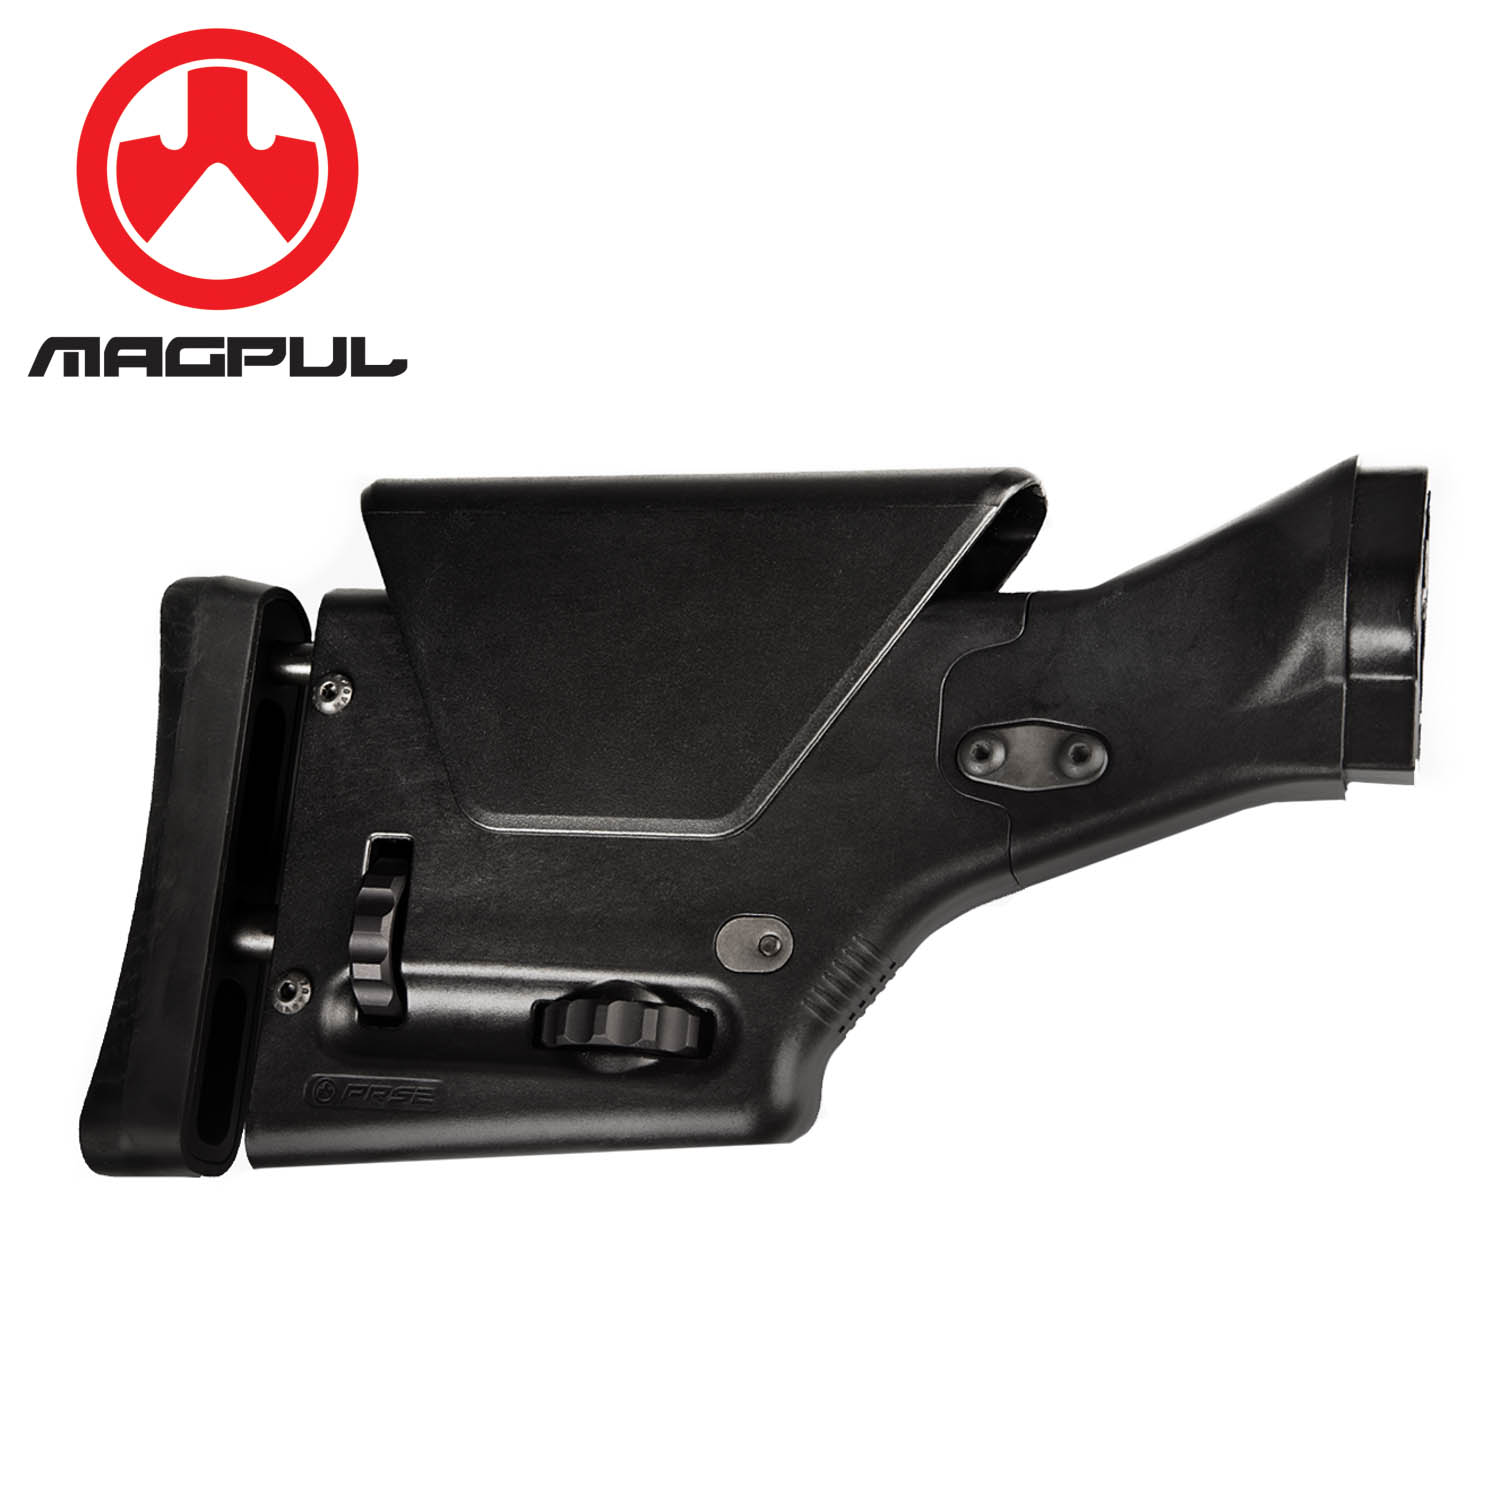 This Magpul PRS2 manufactured precision-adjustable stock is for the Heckler...